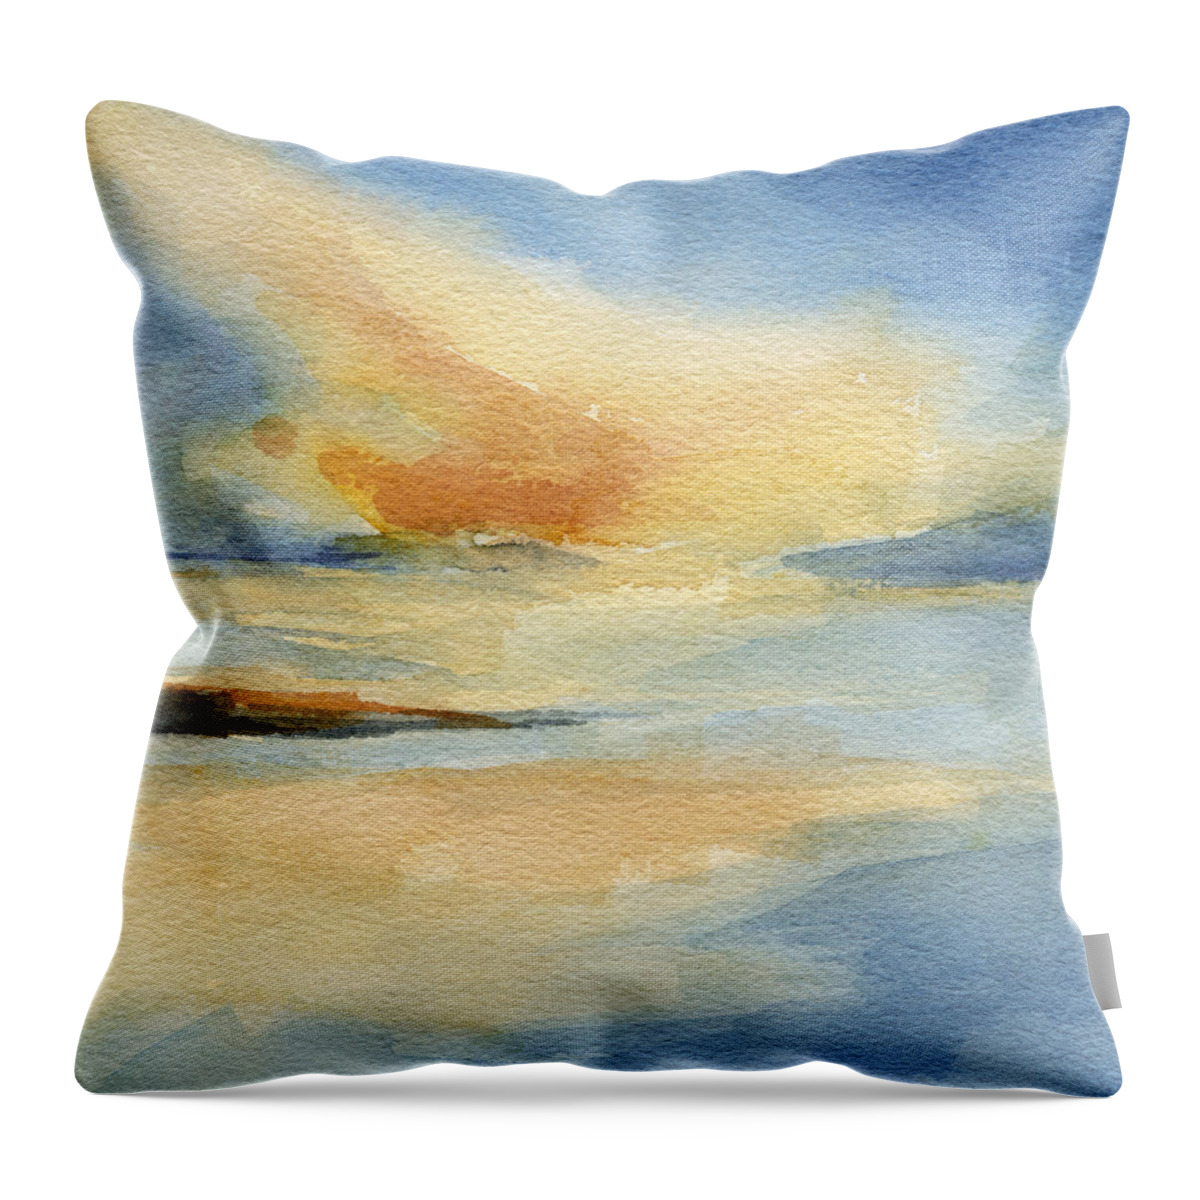 Seascape Throw Pillow featuring the painting Cape Cod Sunset Seascape Painting by Beverly Brown